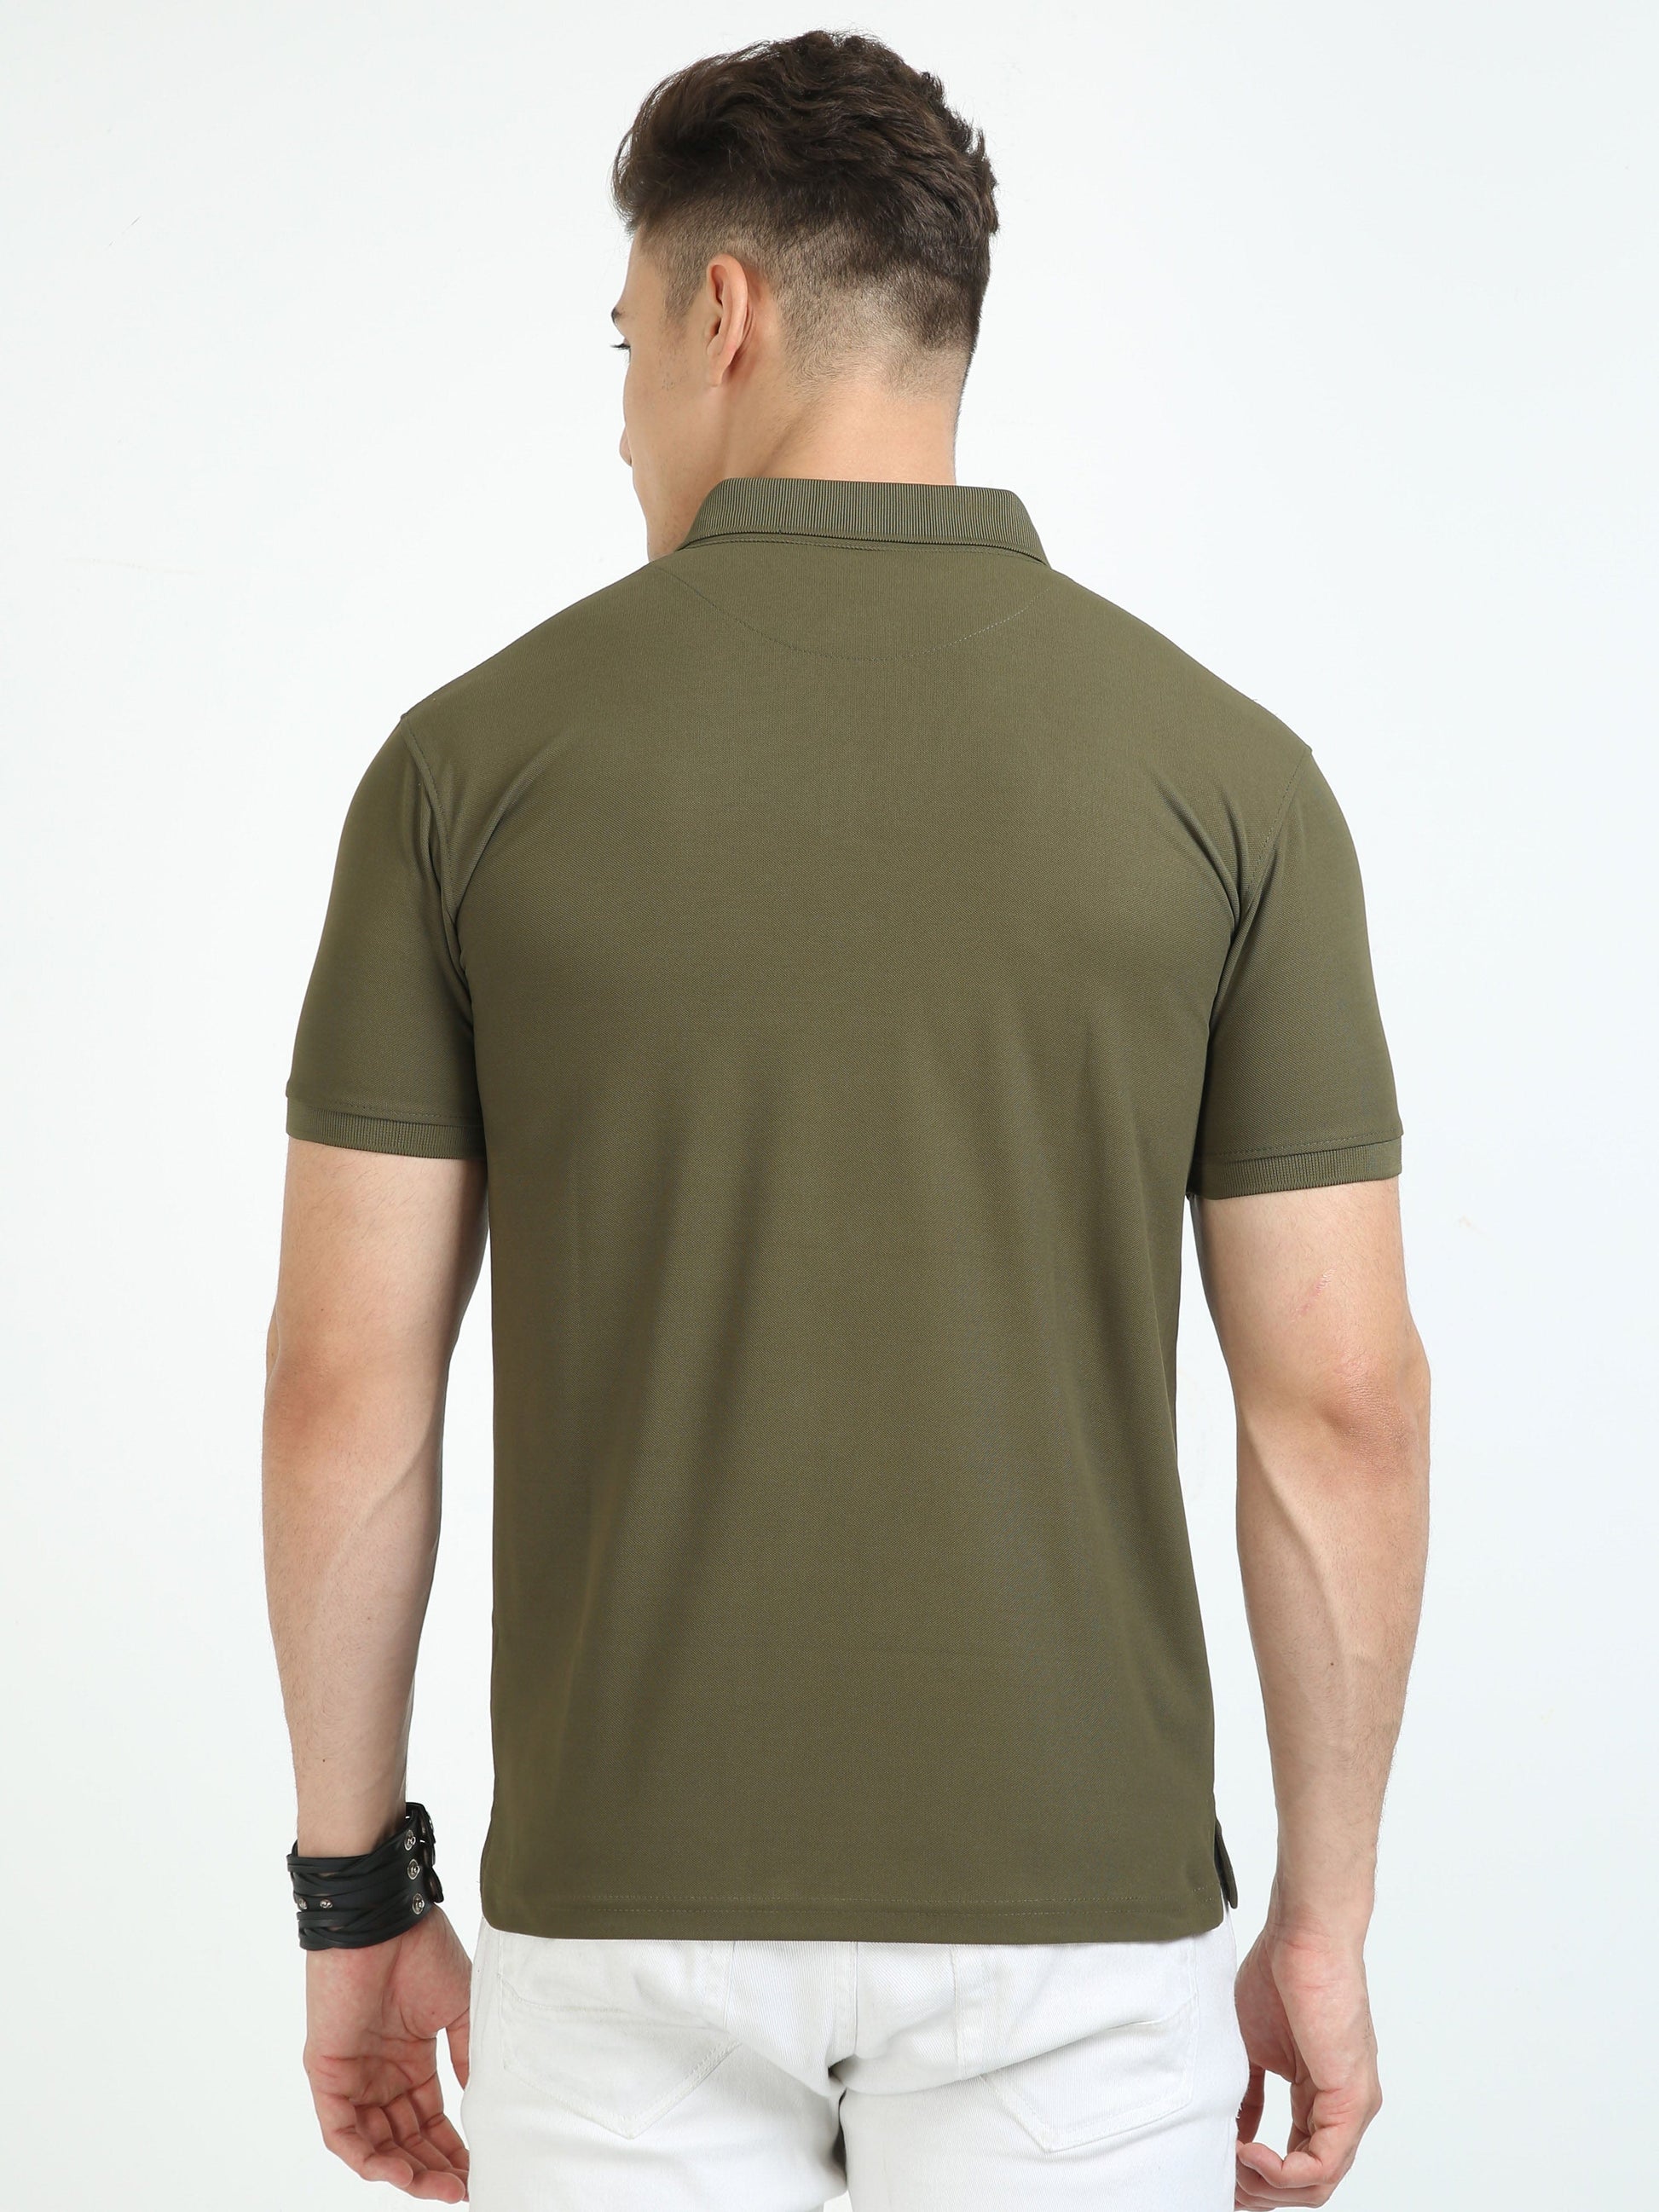 Olive Green Men's Polo T-shirt